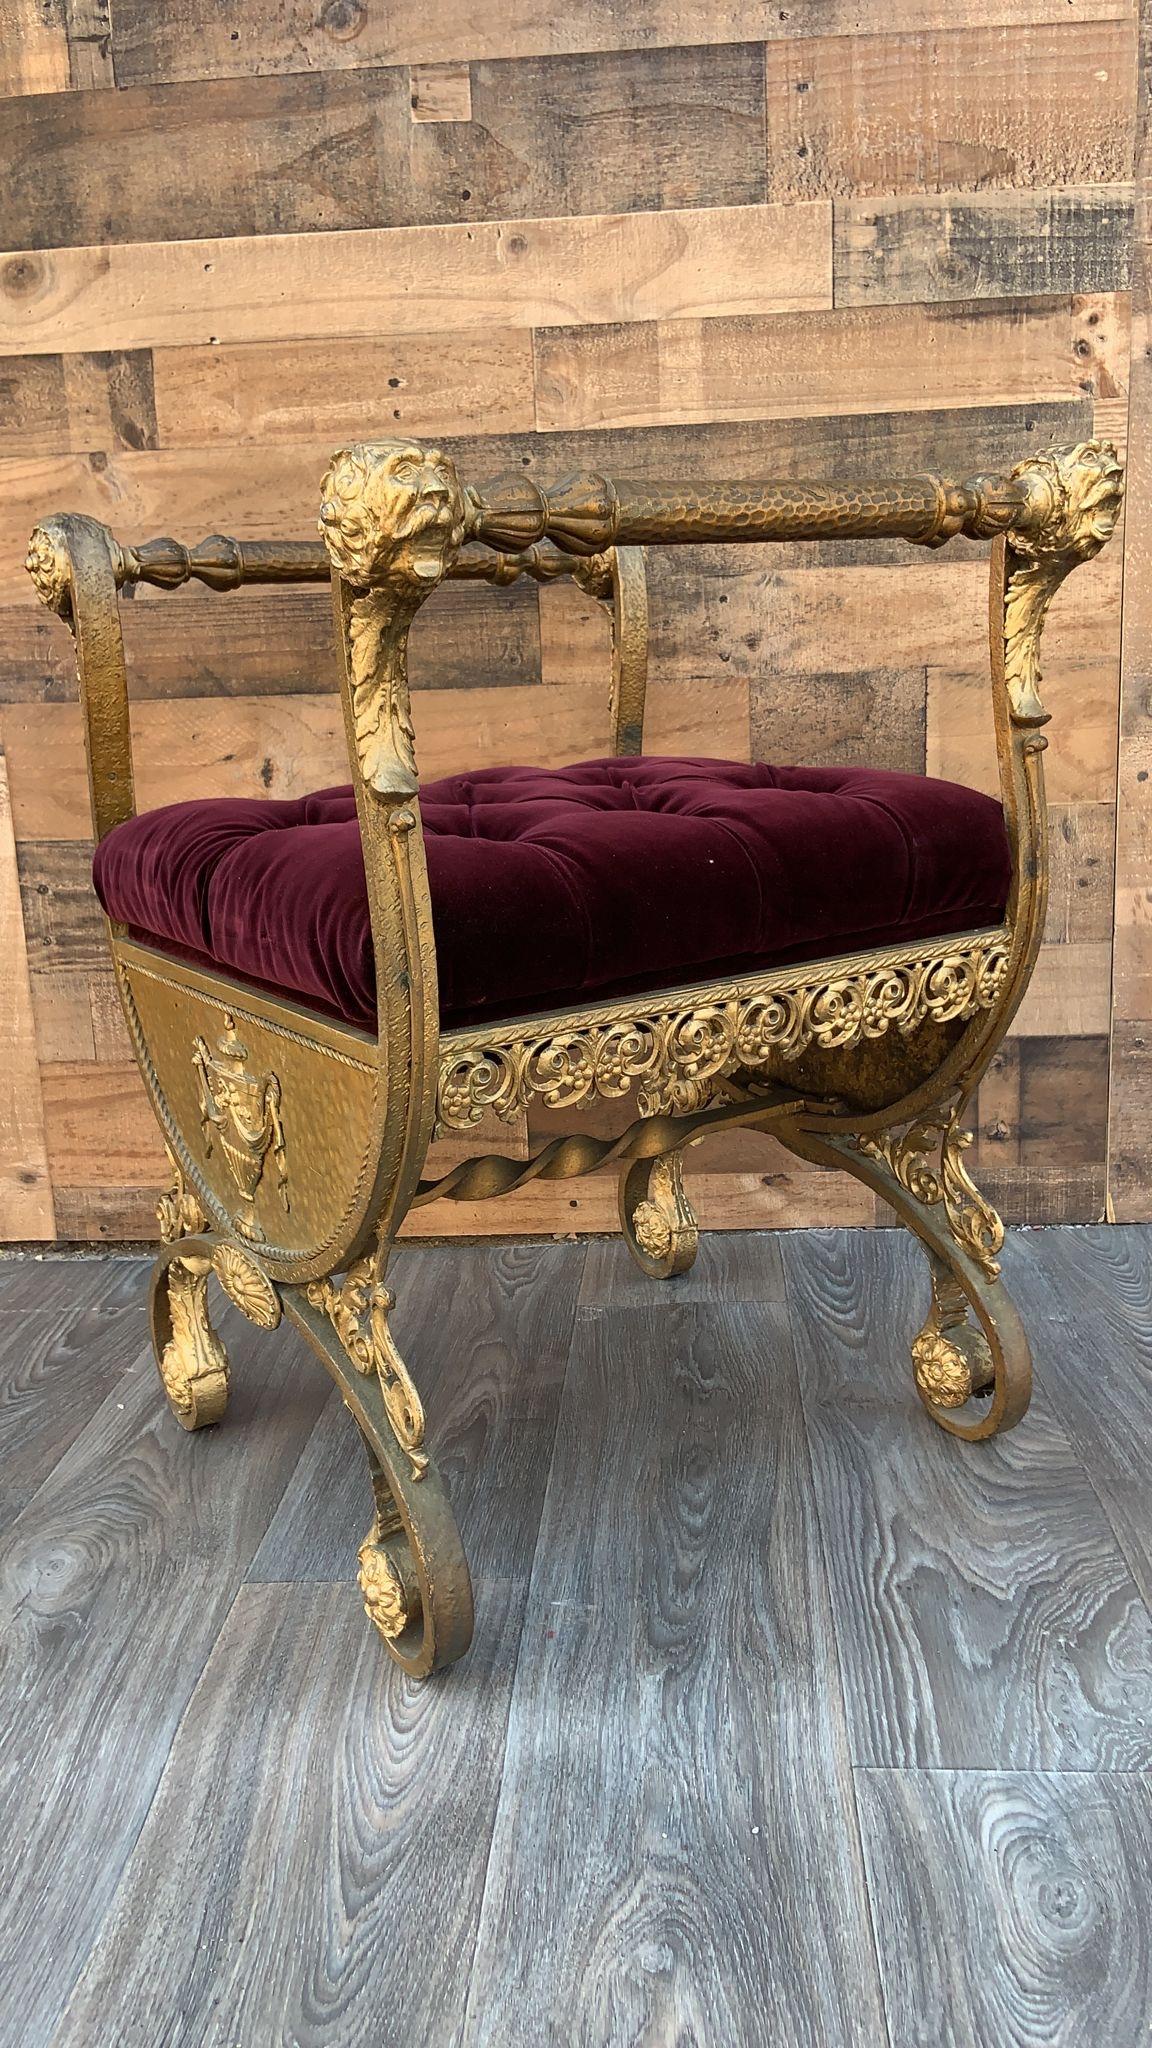 Antique Italian Renaissance Ornate Gild Scrolled Iron Vanity Bench Newly Upholstered in Deep-Maroon Tufted Velvet

Super heavy and unique piece to add to your bathroom, closet or make up vanity. 

Circa 1870

H 29